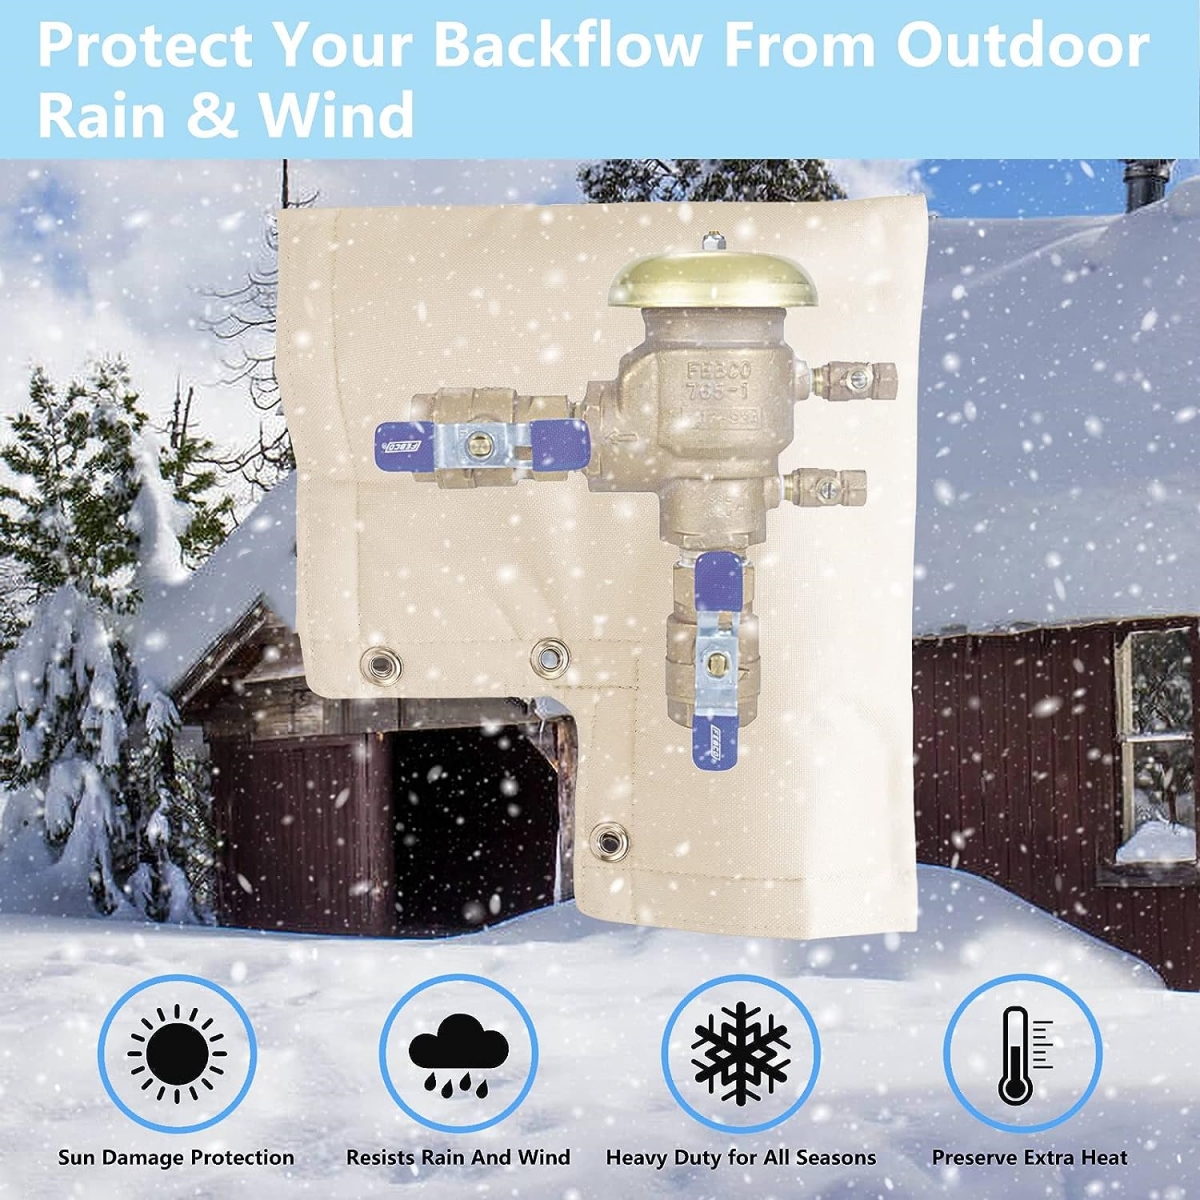 Insulated Backflow Preventer Cover, Double Wall Bell Cover Water Well  Pump Covers, Well Head Cover, Winter Pipe Cover, Sprinkler Valve Cover,  Insulated Pouch, Pipe Insulation Bag For Winter Freeze Protection, Protects